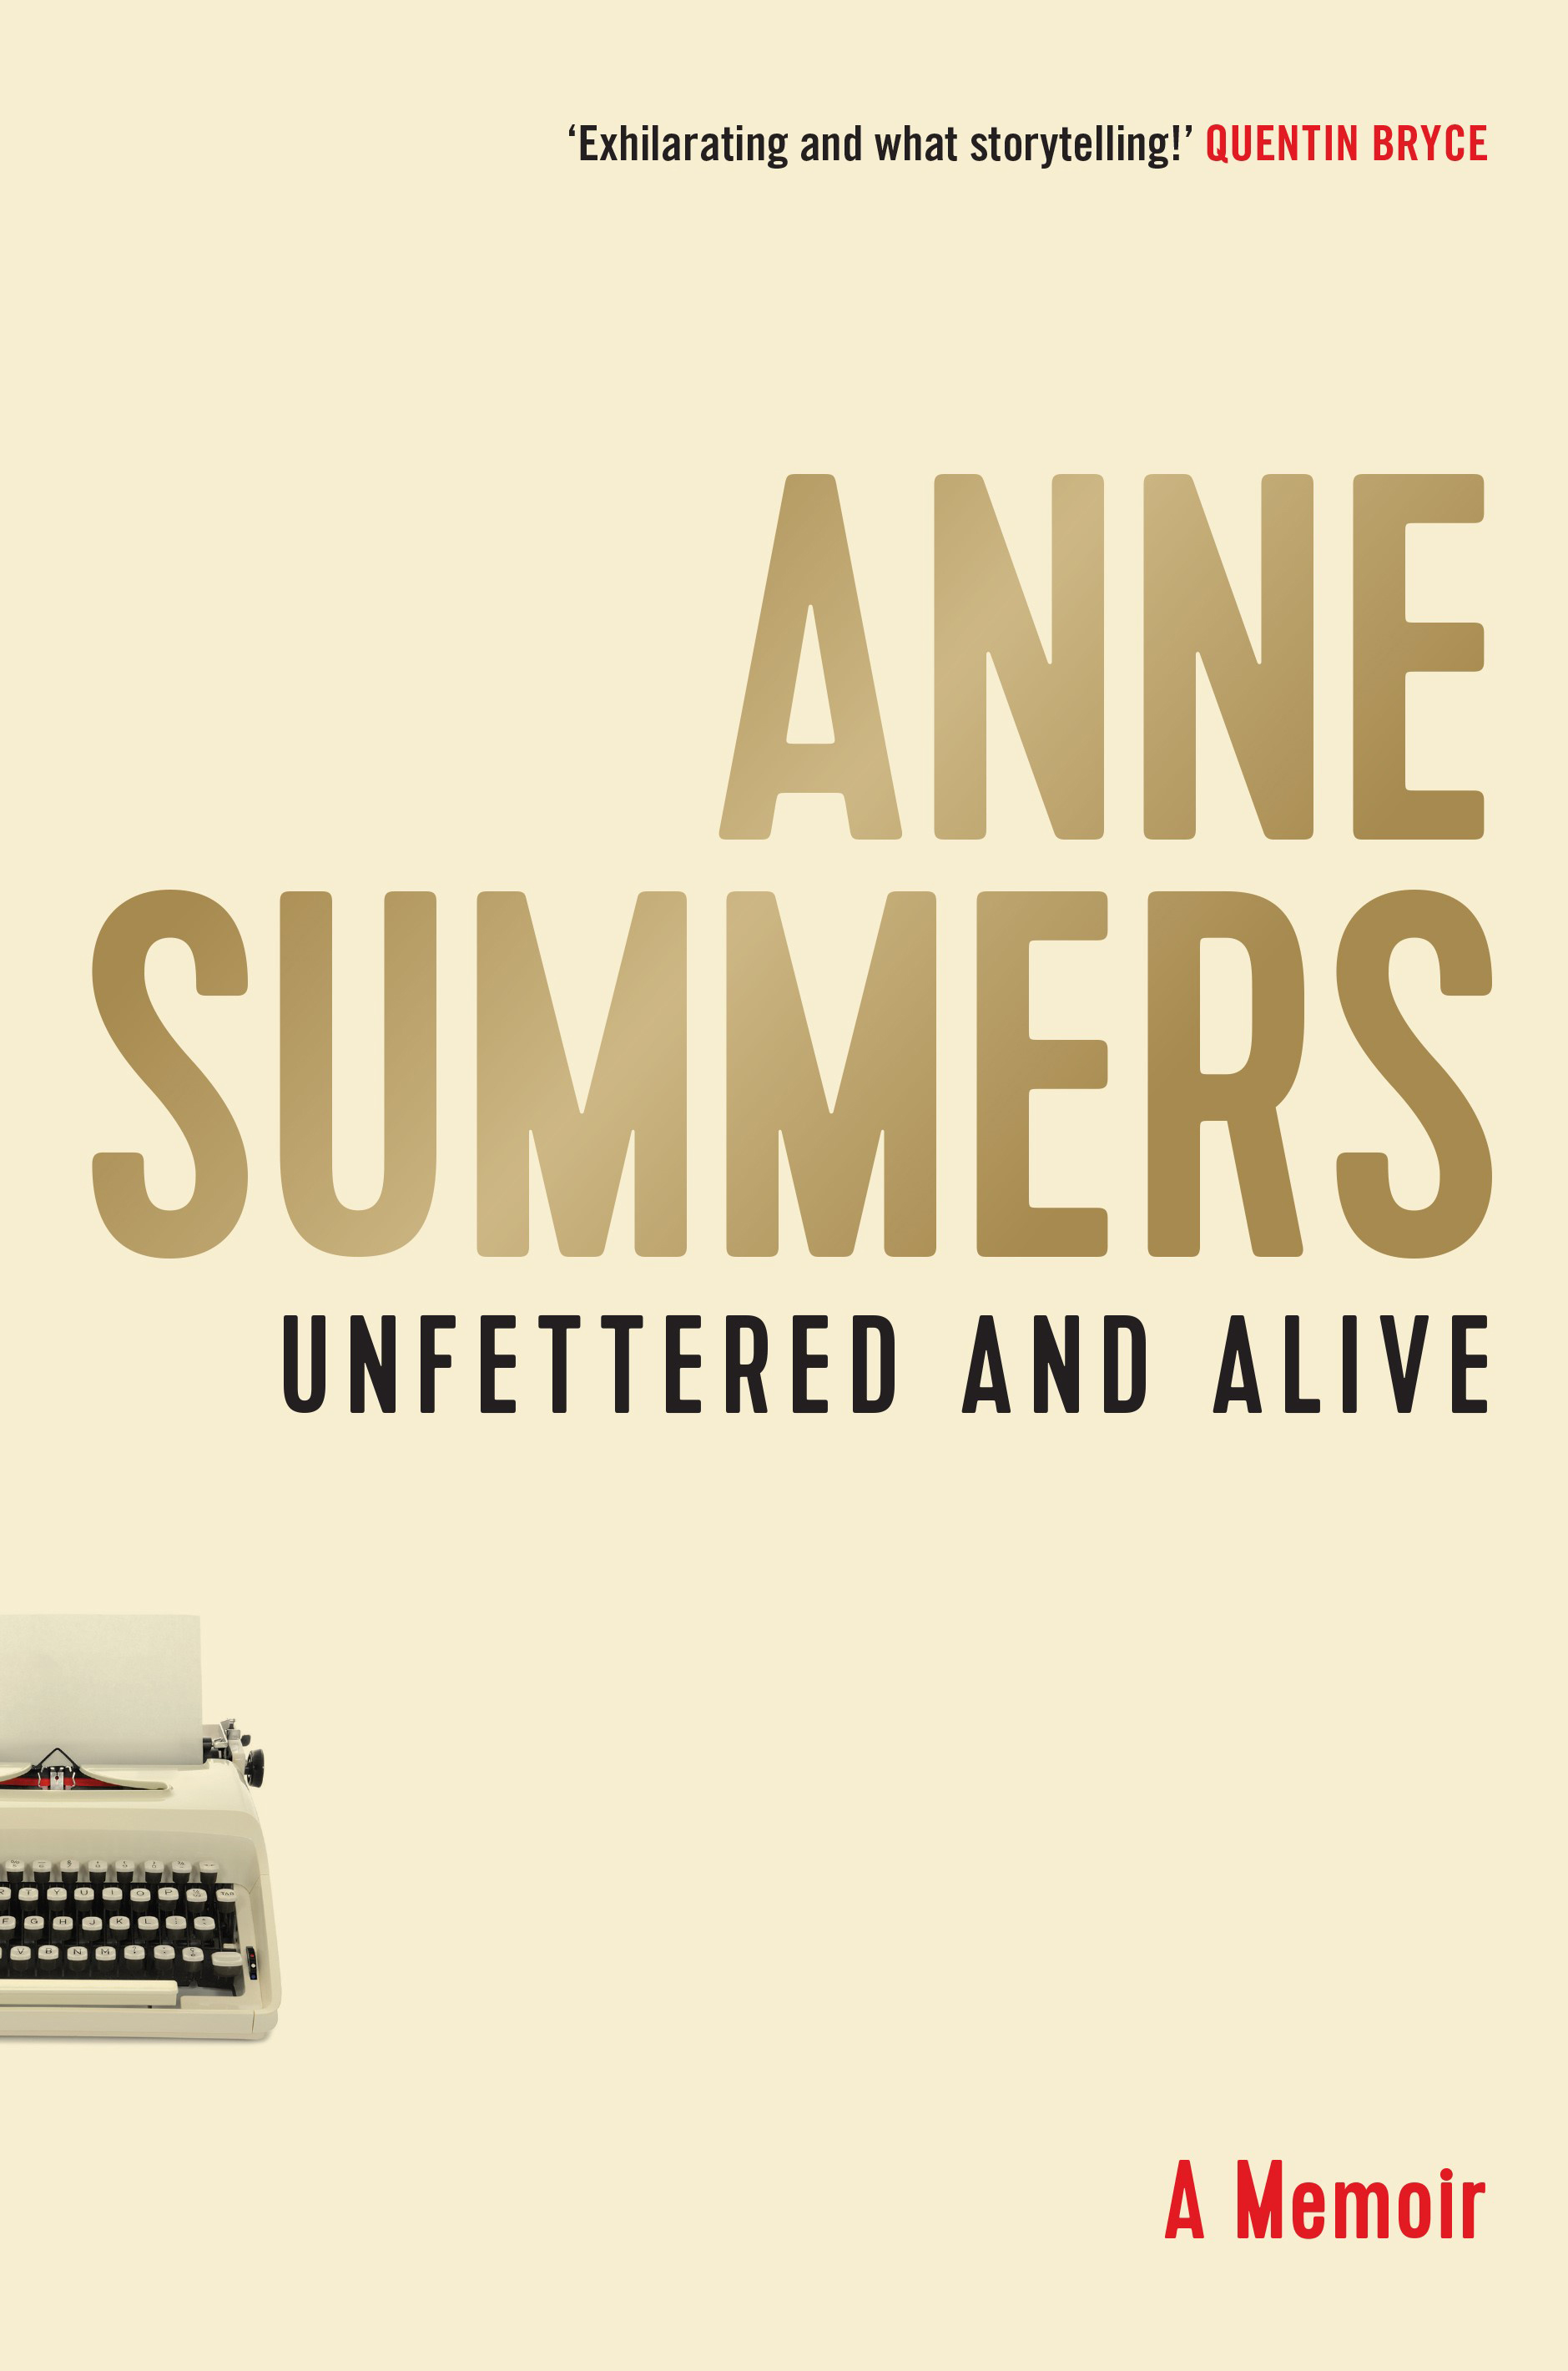  “Unfettered and Alive – A Memoir”